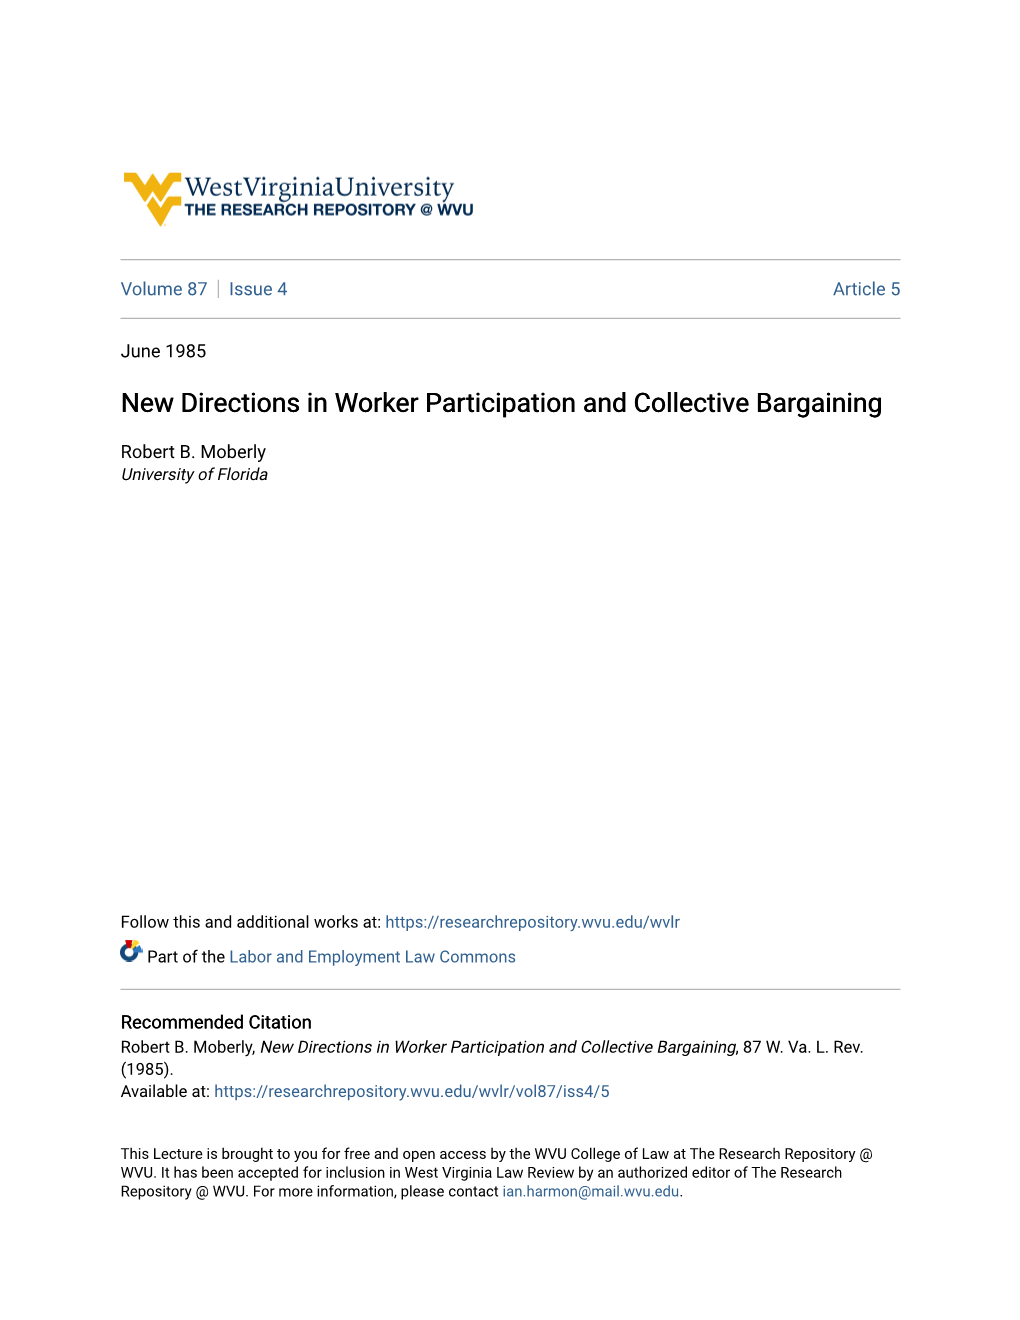 New Directions in Worker Participation and Collective Bargaining